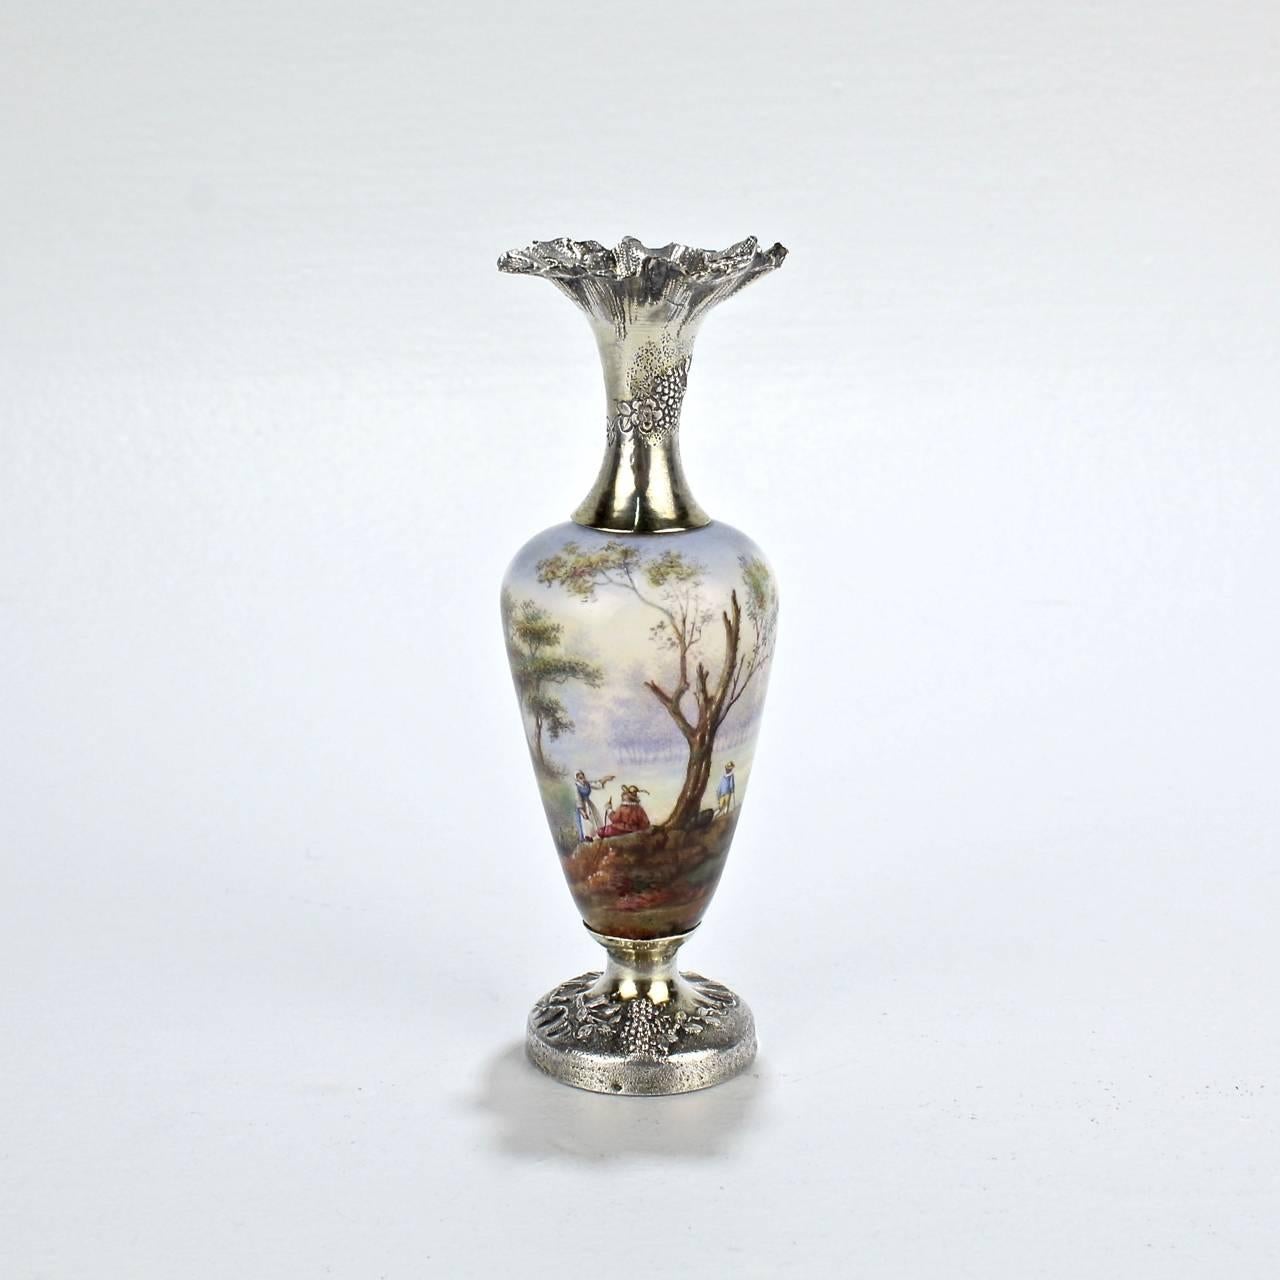 A fine and rare French sterling silver and enamel cabinet vase.

The enameled central body depicts a bucolic French country landscape with a watermill and river. 

The ruffled silver top and foot both appear to retain traces of a gold wash. Each